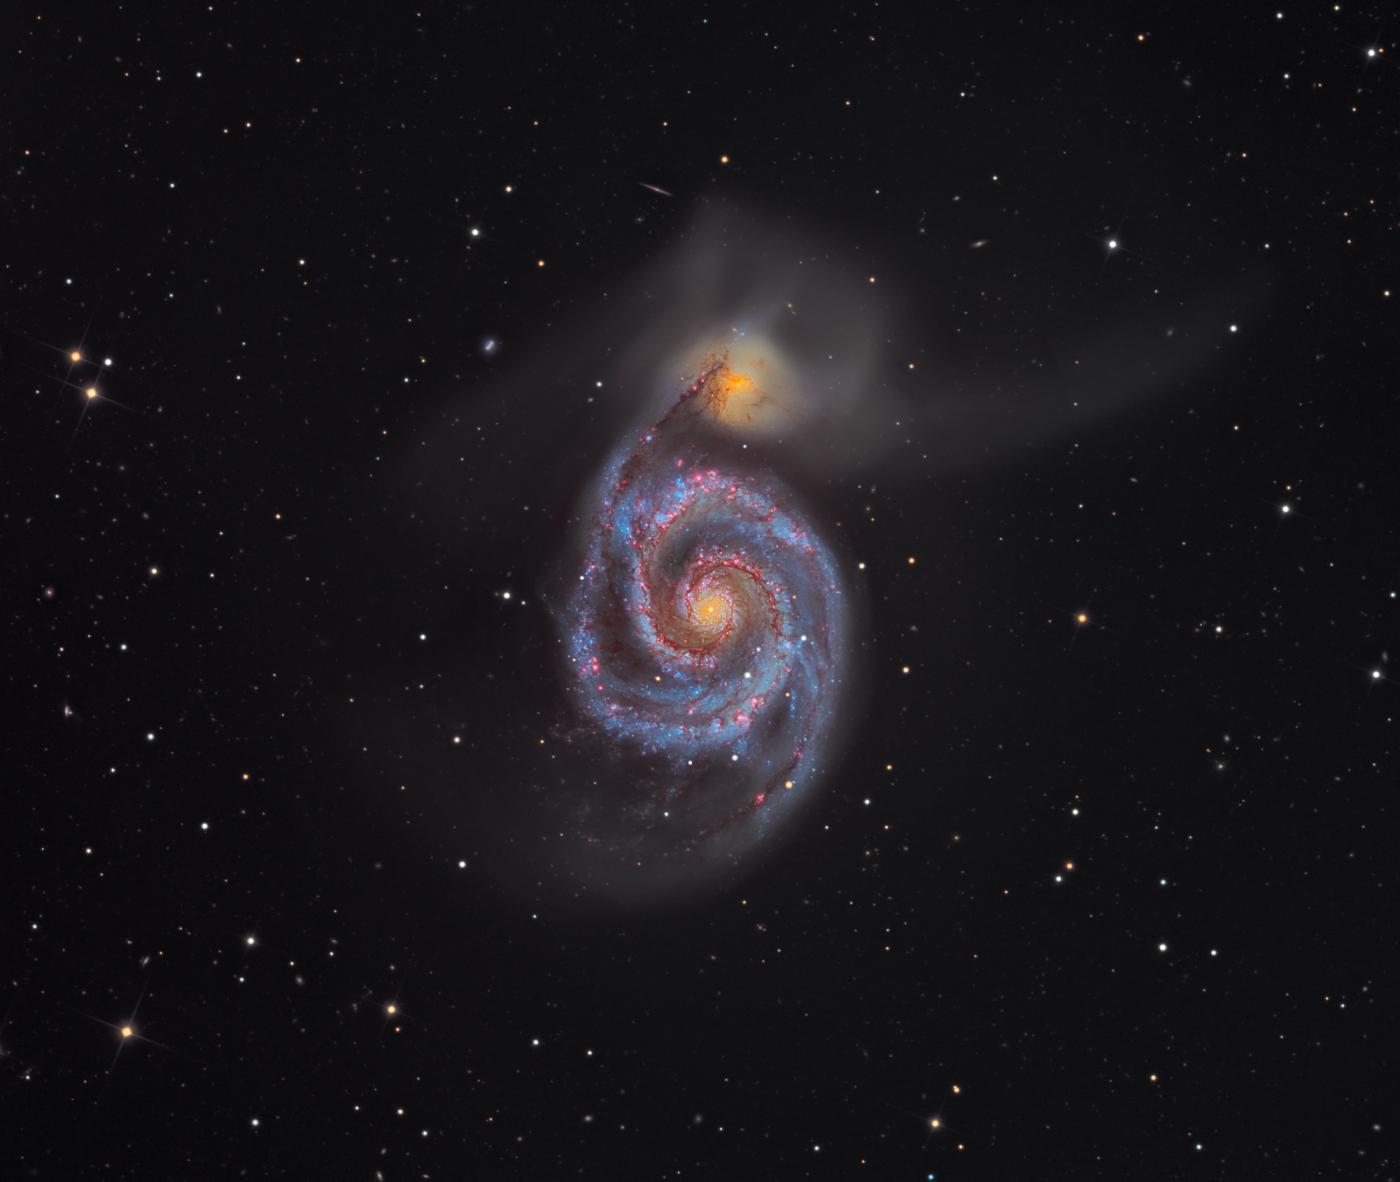 An image showing 'M51 The Whirlpool Galaxy'